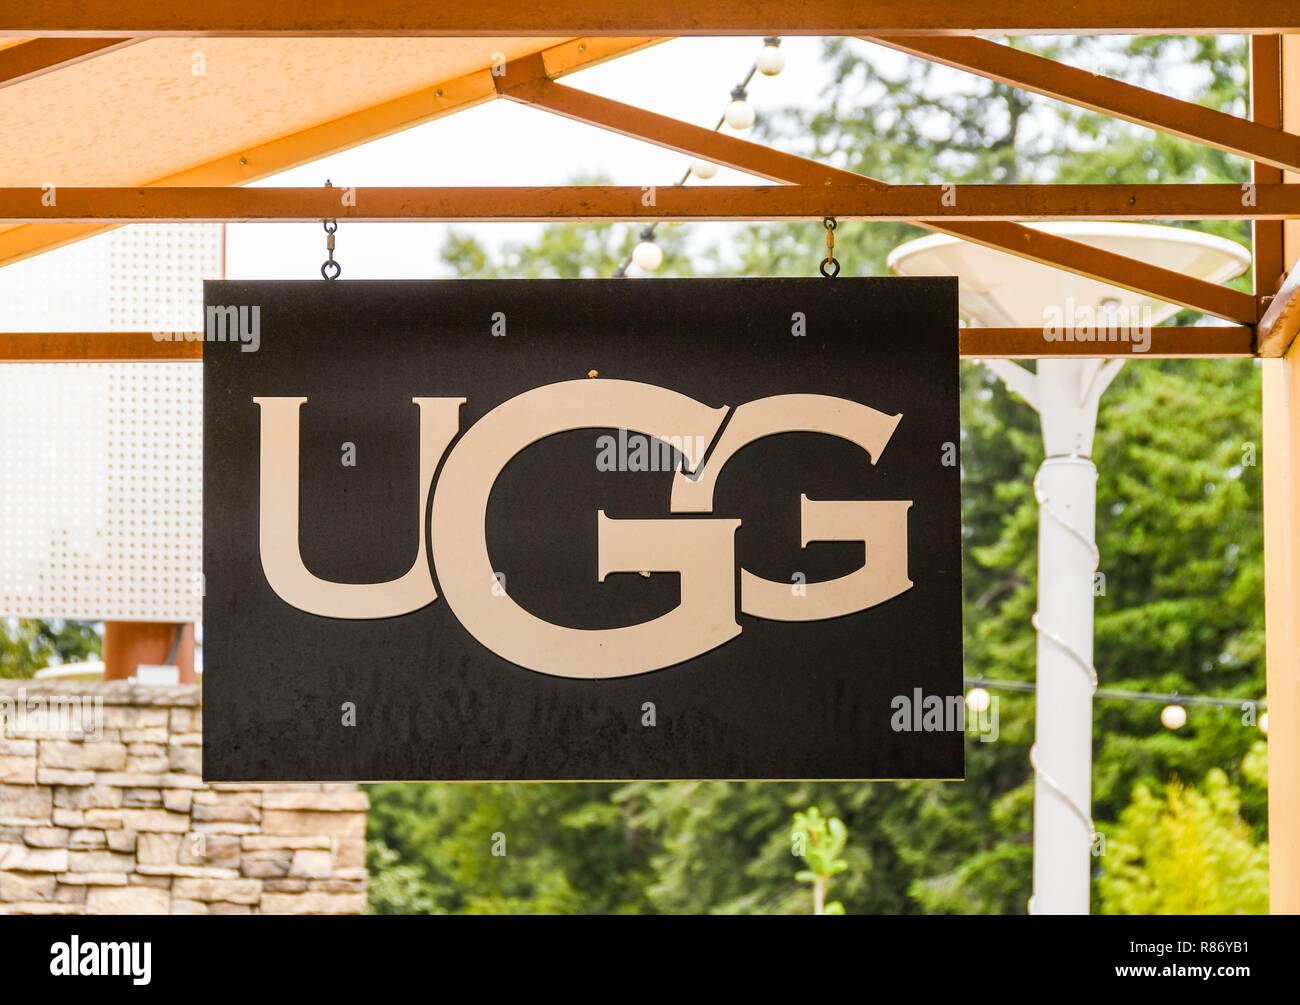 uggs sign